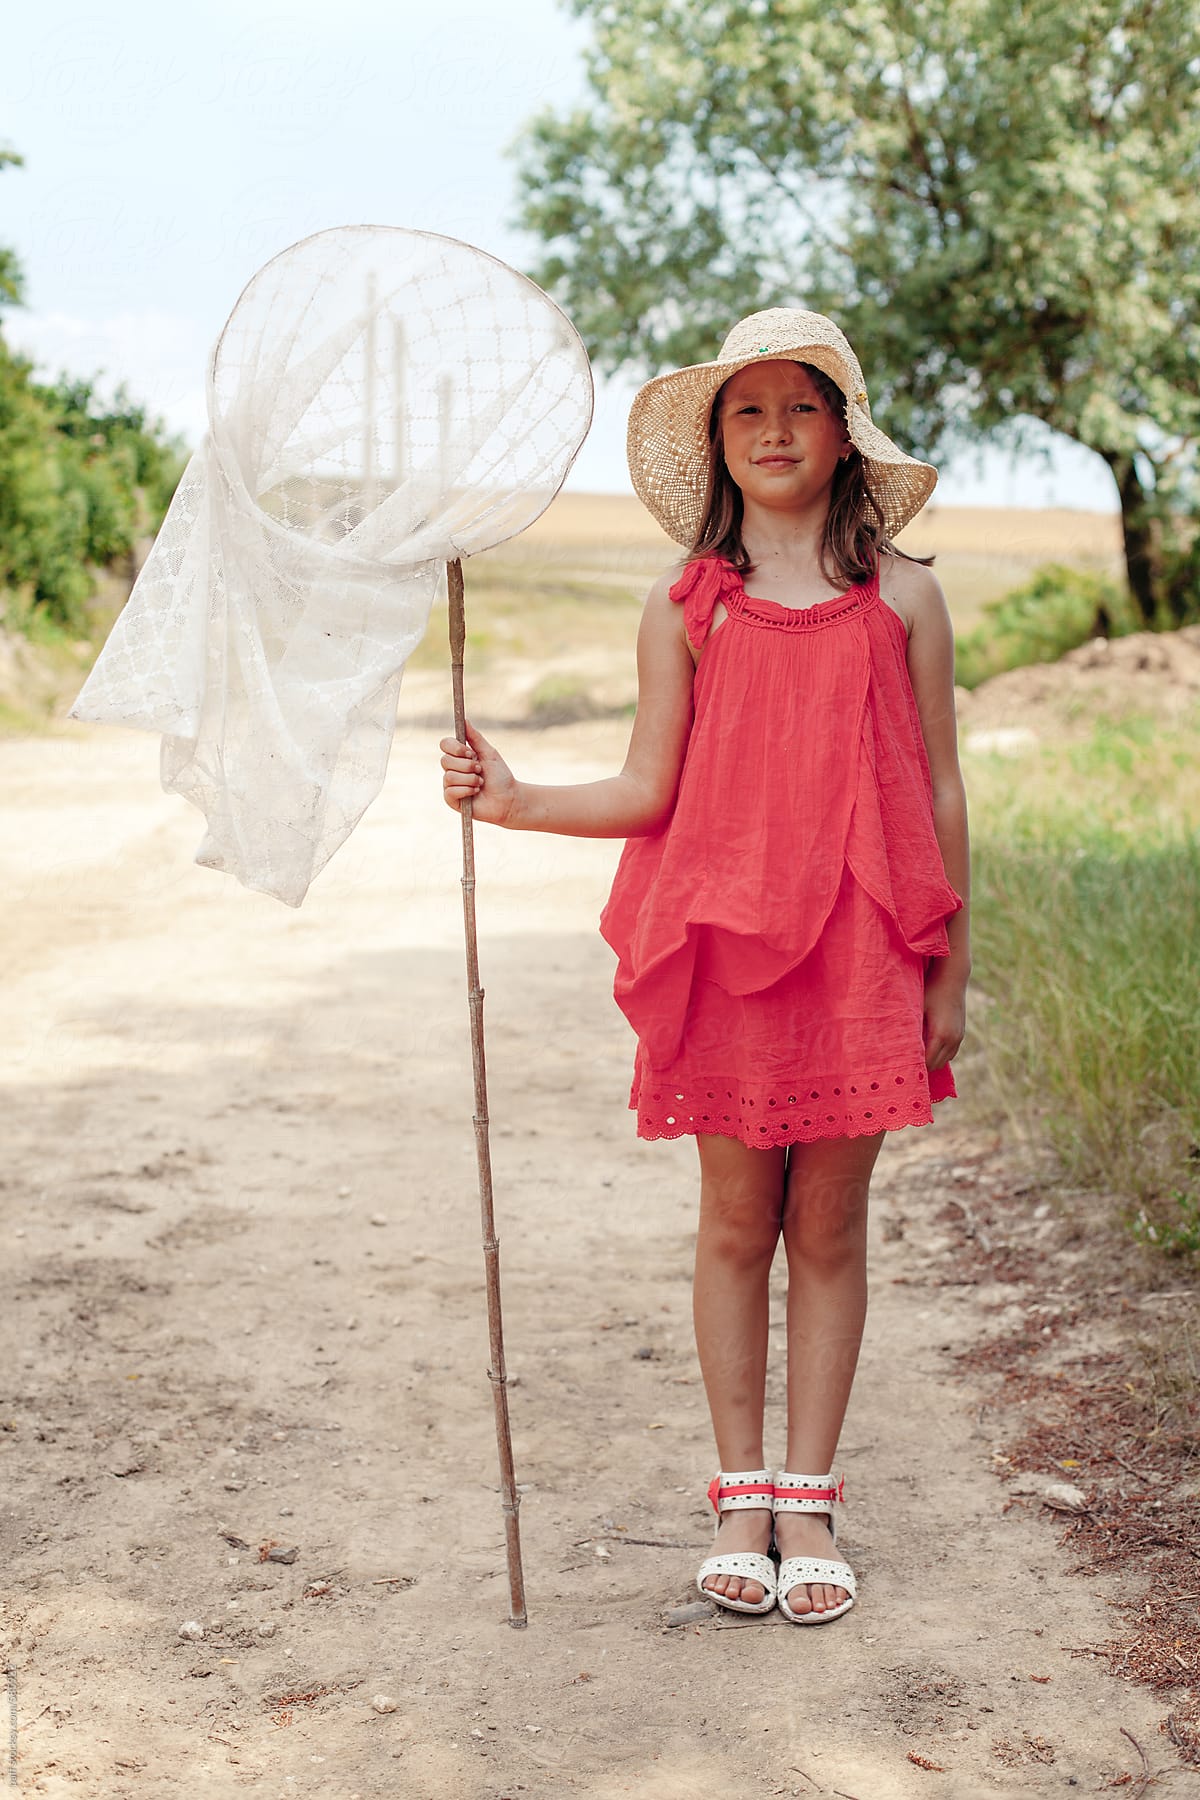 Little Girl With Red Dress Holding A Bug Catching Net by Stocksy